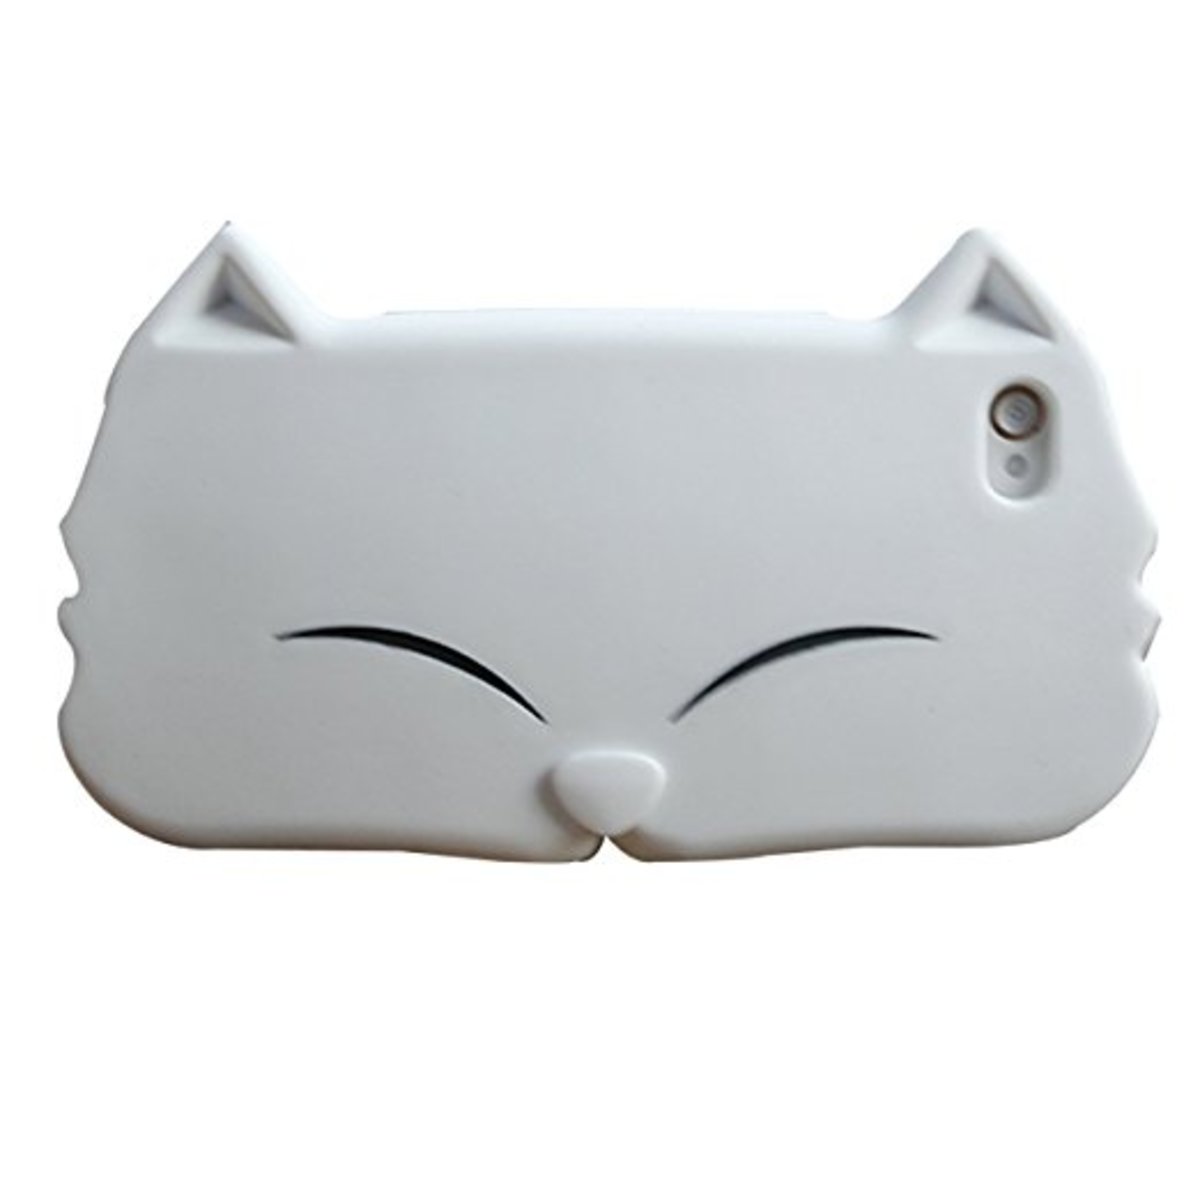 We all have phones and most of us have a protective cover on it...is your iPhone cover a cat?